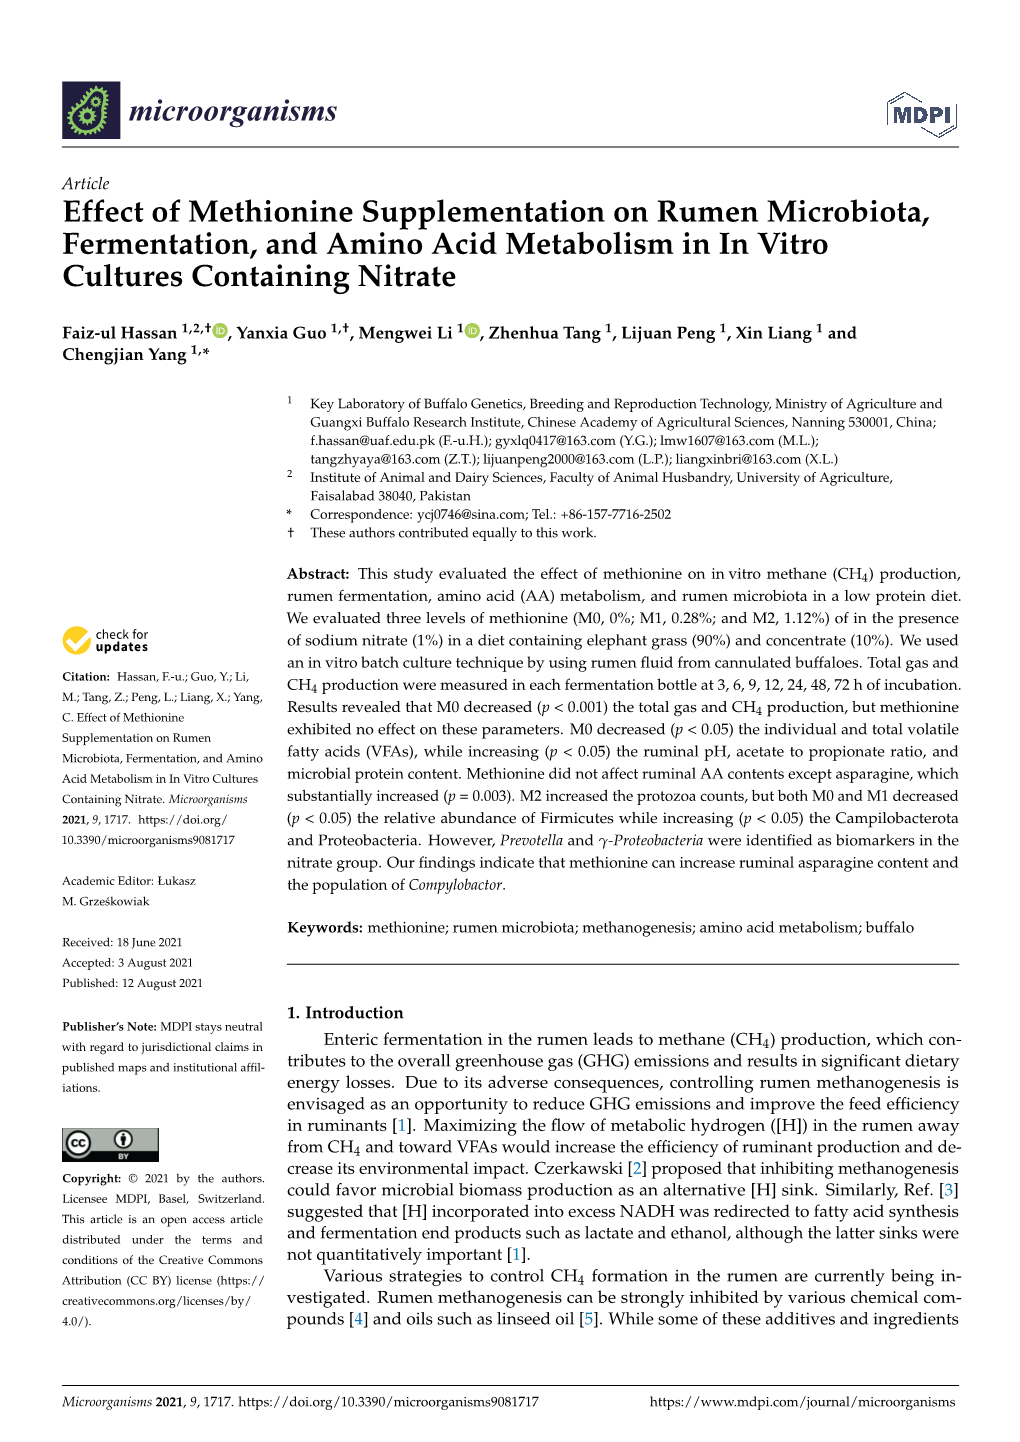 Effect of Methionine Supplementation on Rumen Microbiota, Fermentation, and Amino Acid Metabolism in in Vitro Cultures Containing Nitrate